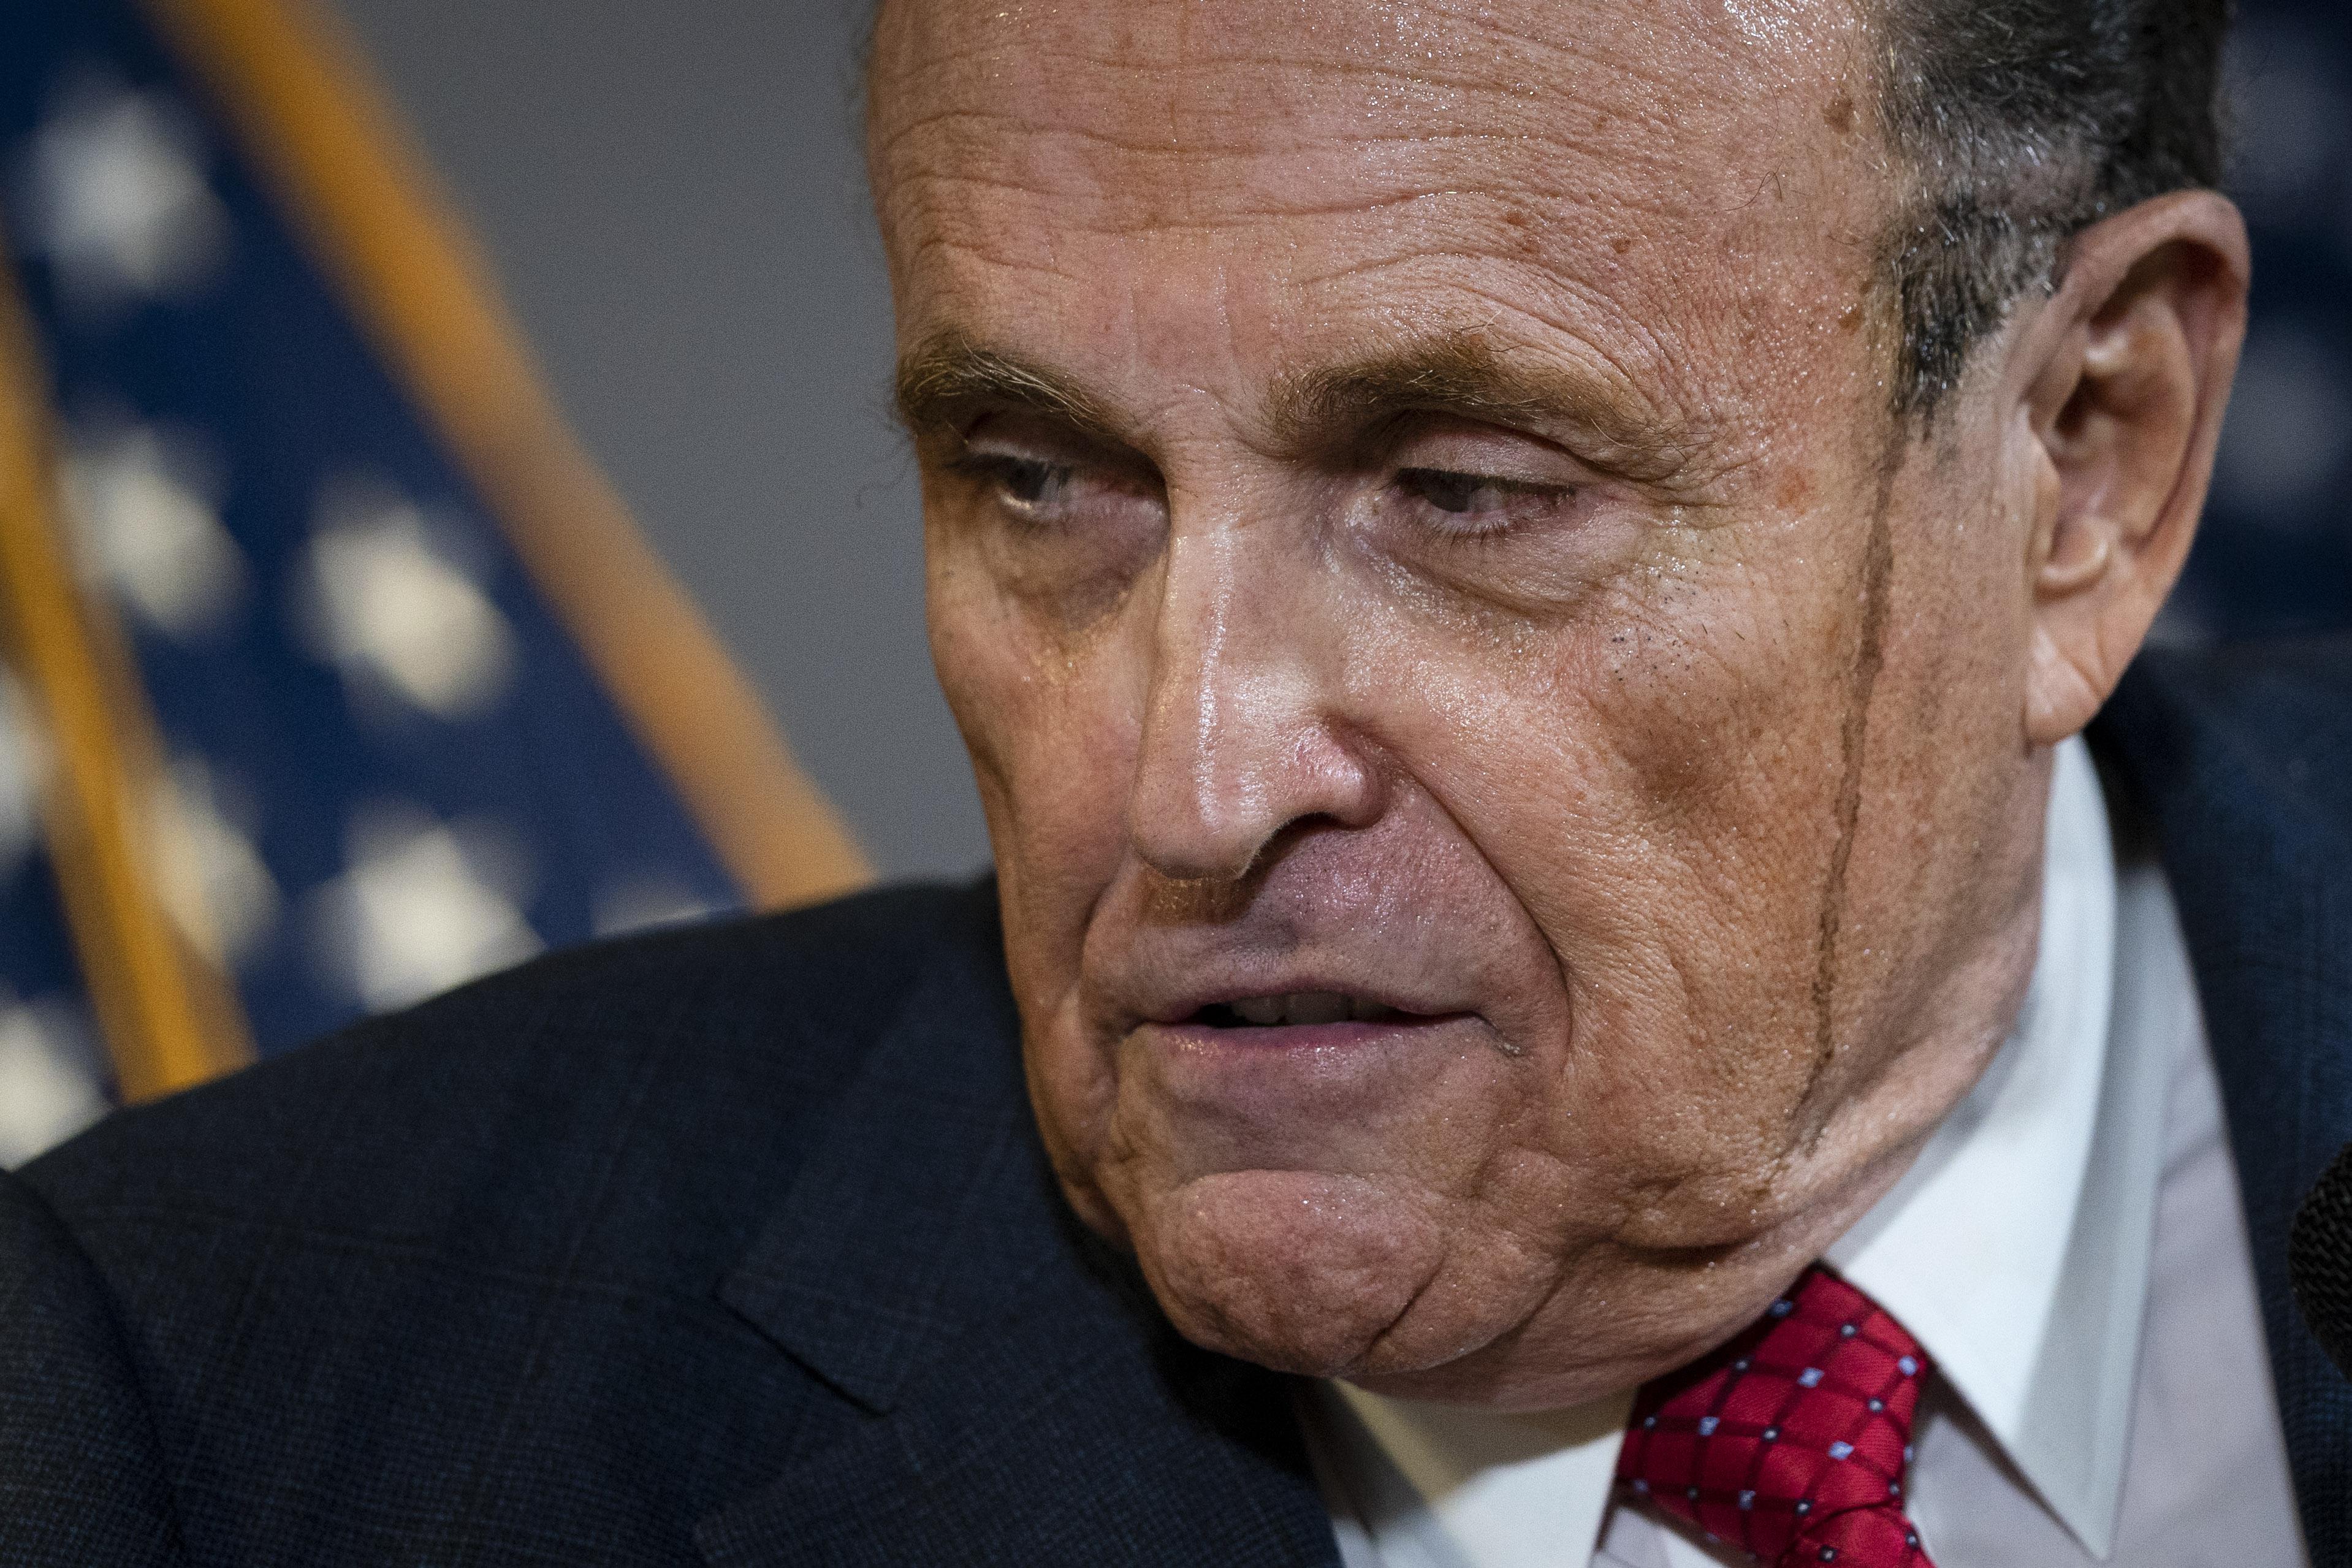 Close-up of Giuliani's face with a smear from apparent hair coloring running down the side of his face